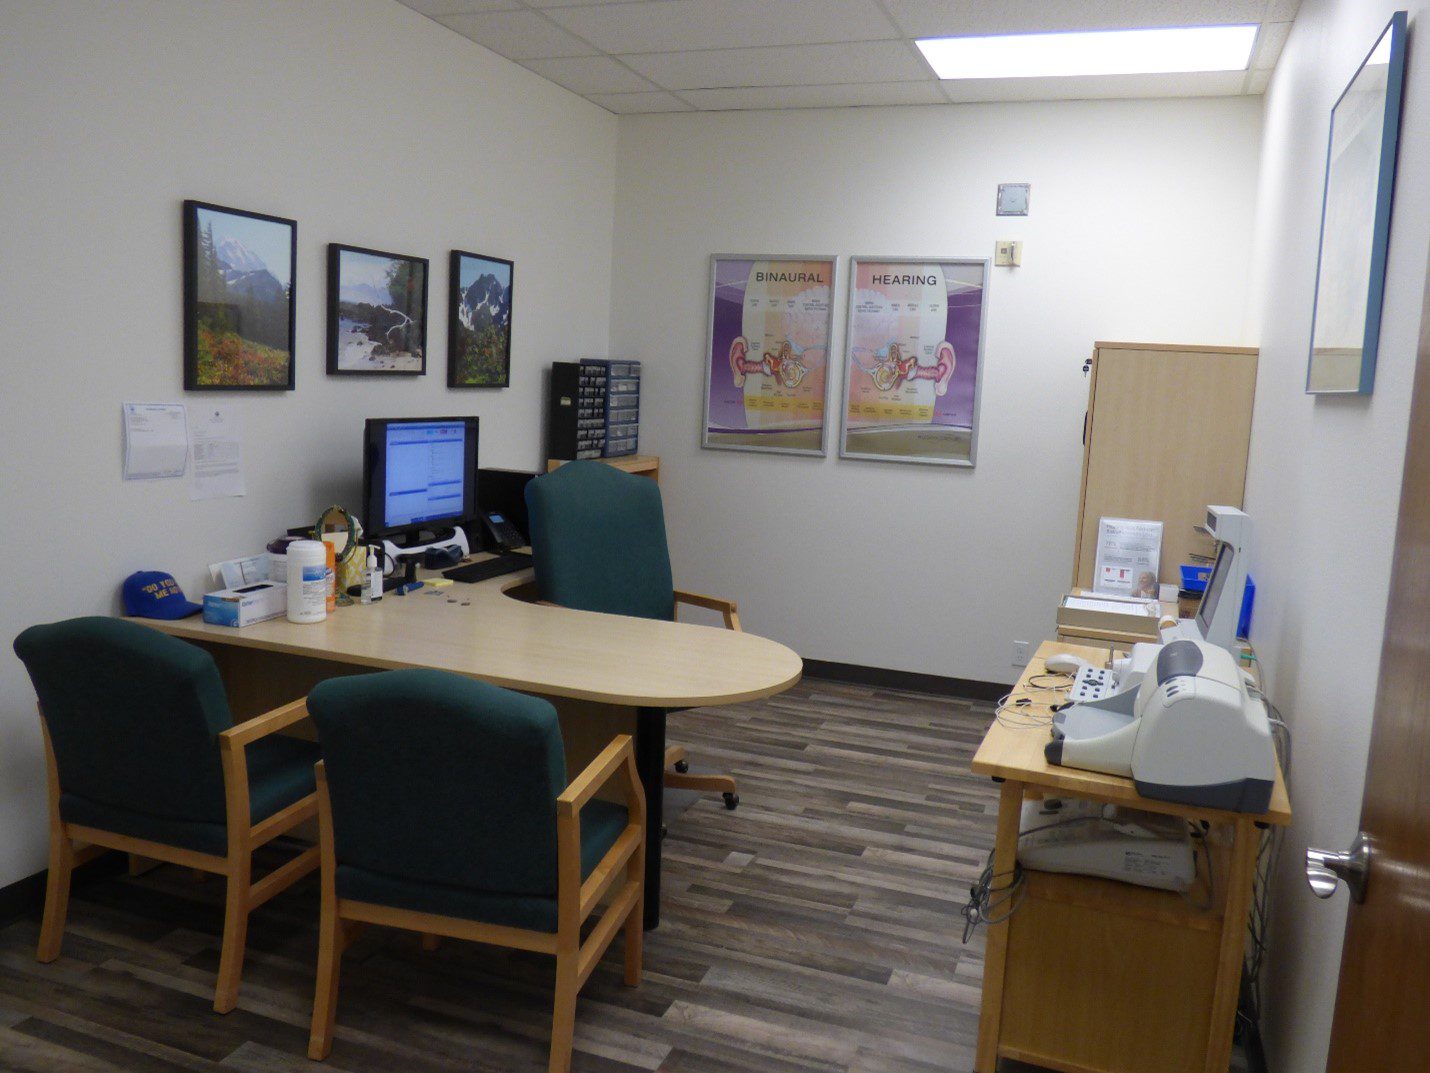 Earwax removal in clean and modern environment in Lacey at South Sound Audiology